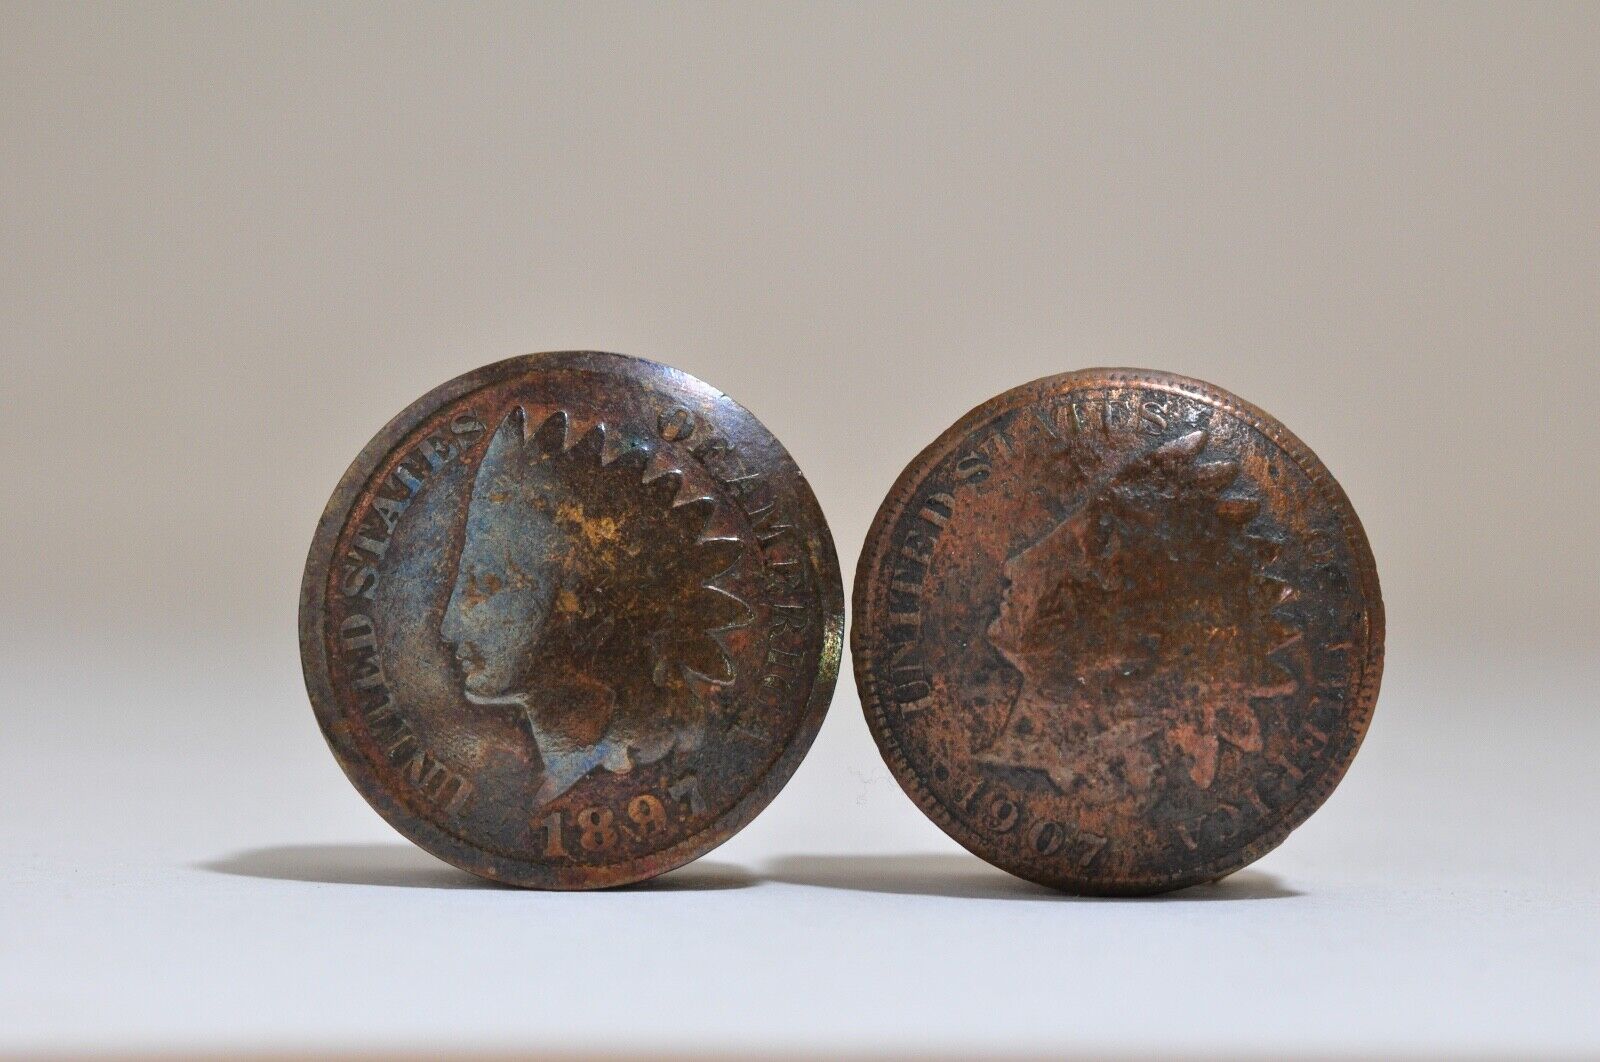 Antique Indian Head Penny Button Covers 1897 & 1907